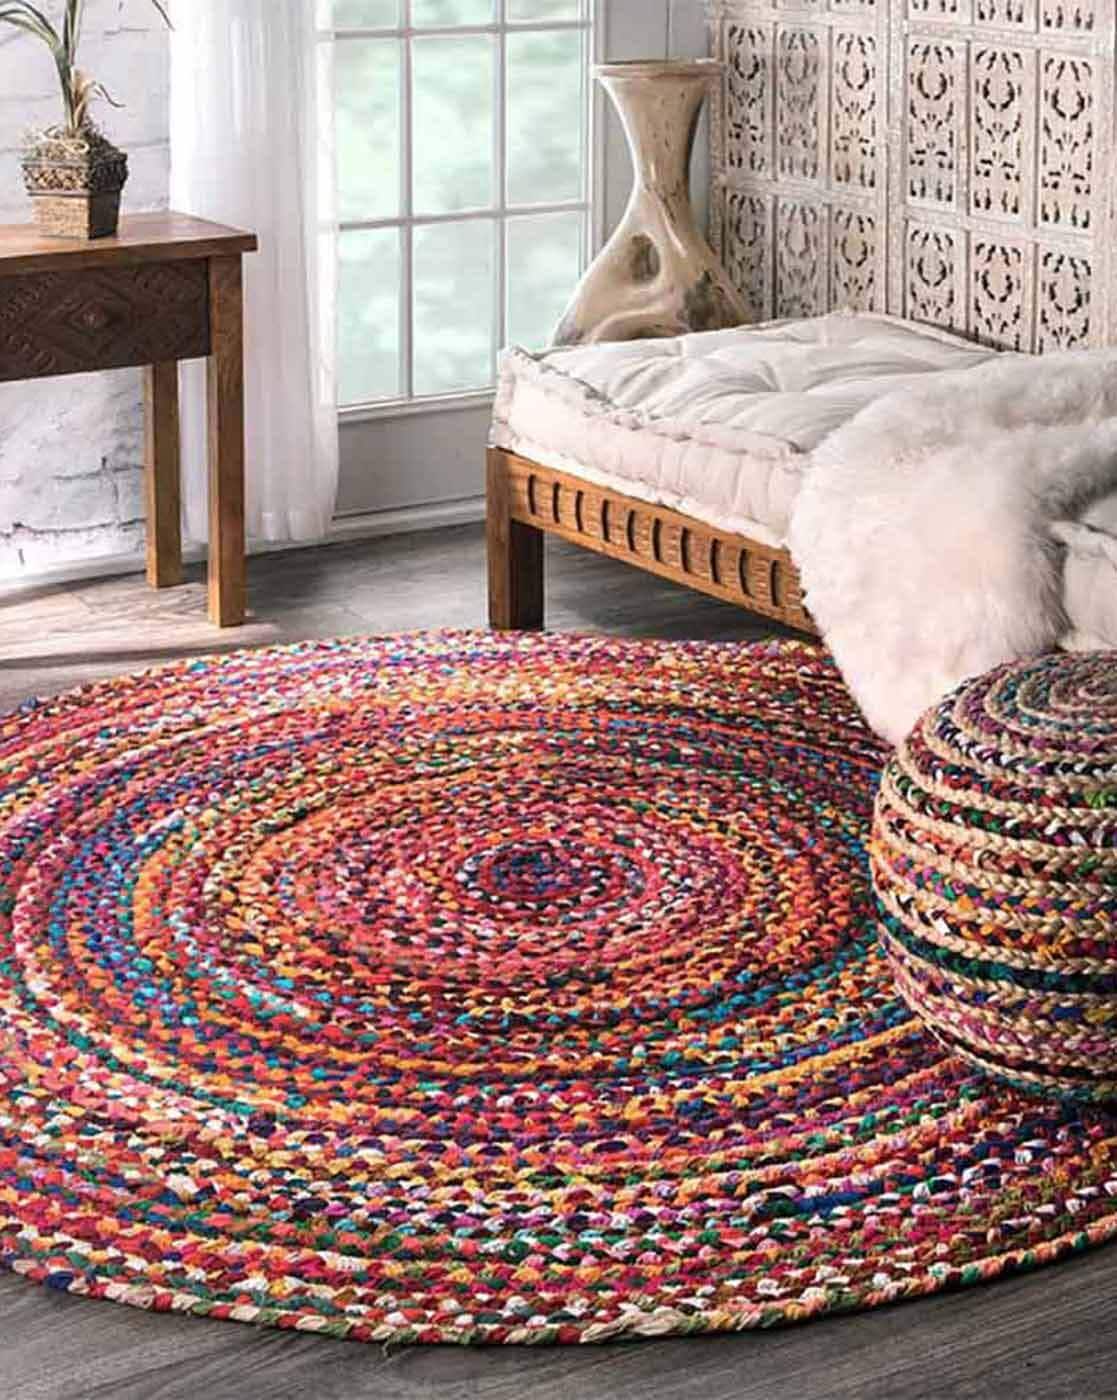 Beautiful Home Cotton Green Chindi Braided Flower Round Rug,Hand Woven & Reversible Design Rug,Vibrant Fabric Rugs,Living Room, 70 cm Round